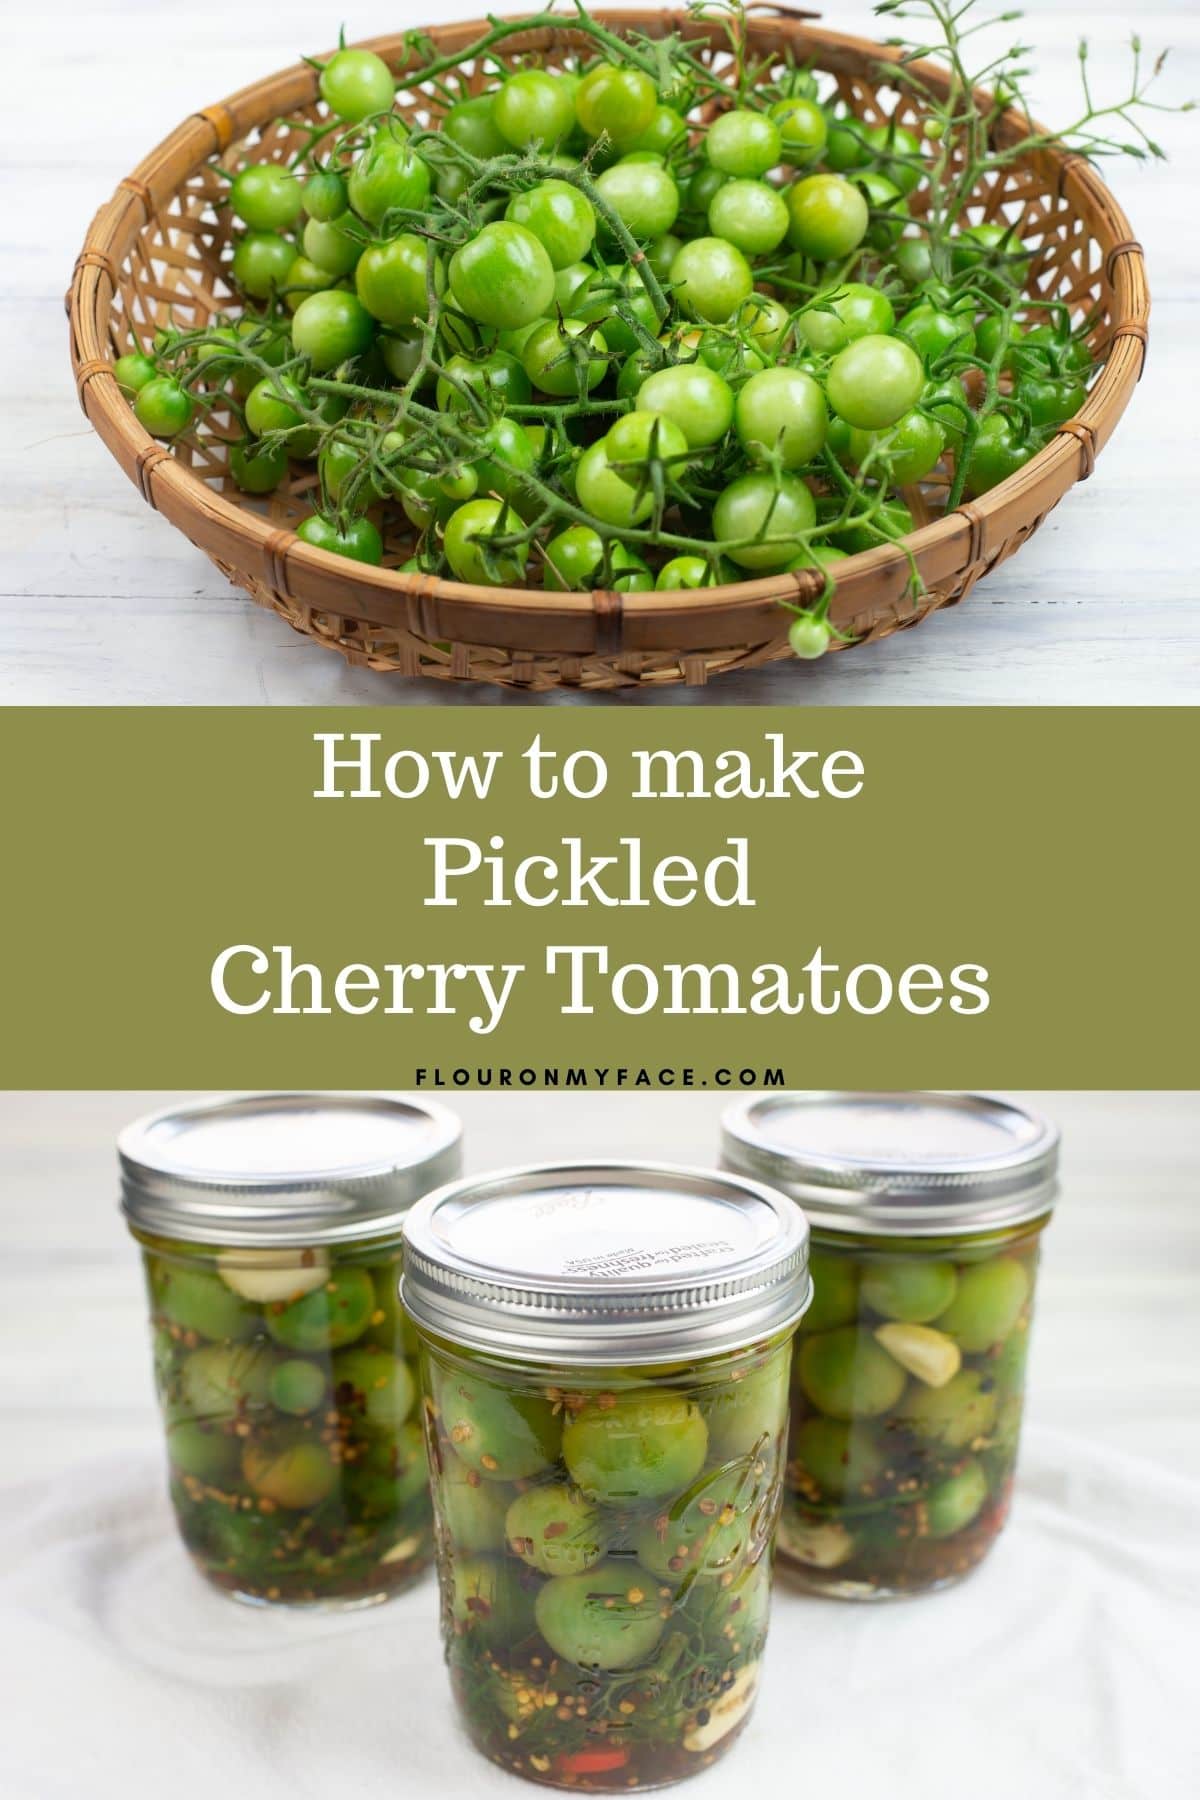 Pickled Green Cherry Tomatoes - Flour On My Face